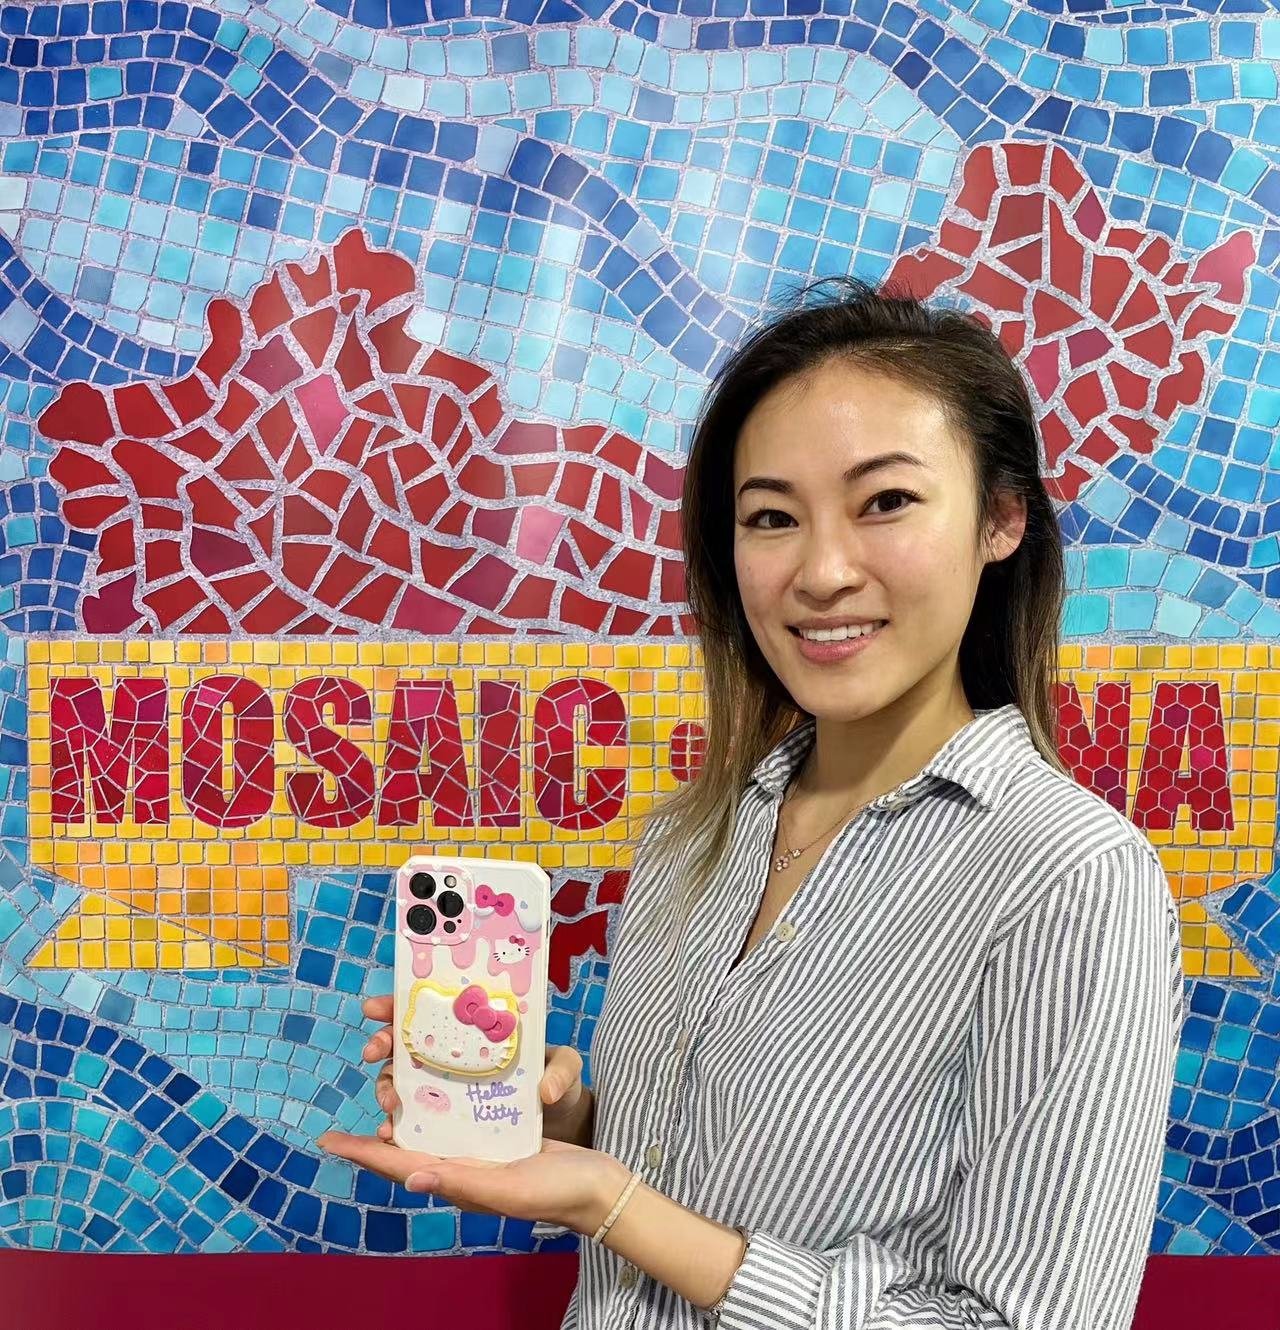 Christina Chao's object: Her phone, demonstrating that it doesn't matter what business you're in, your life in China always revolves around your phone.